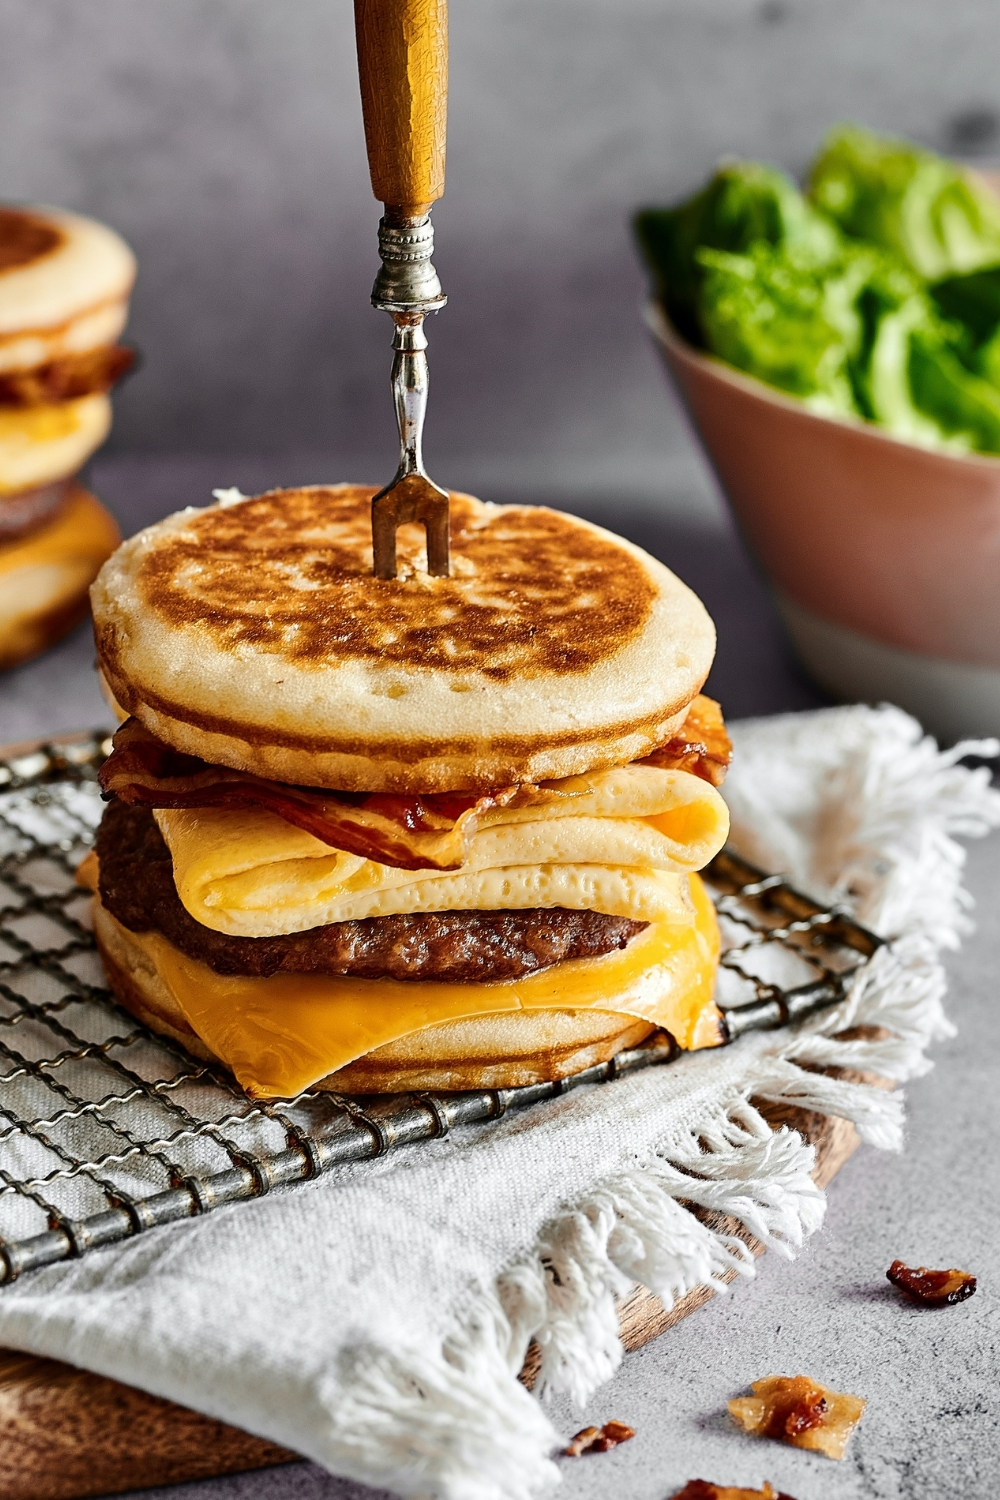 https://imhungryforthat.com/wp-content/uploads/2021/08/sausage-egg-and-cheese-mcgriddle-recipe.jpg